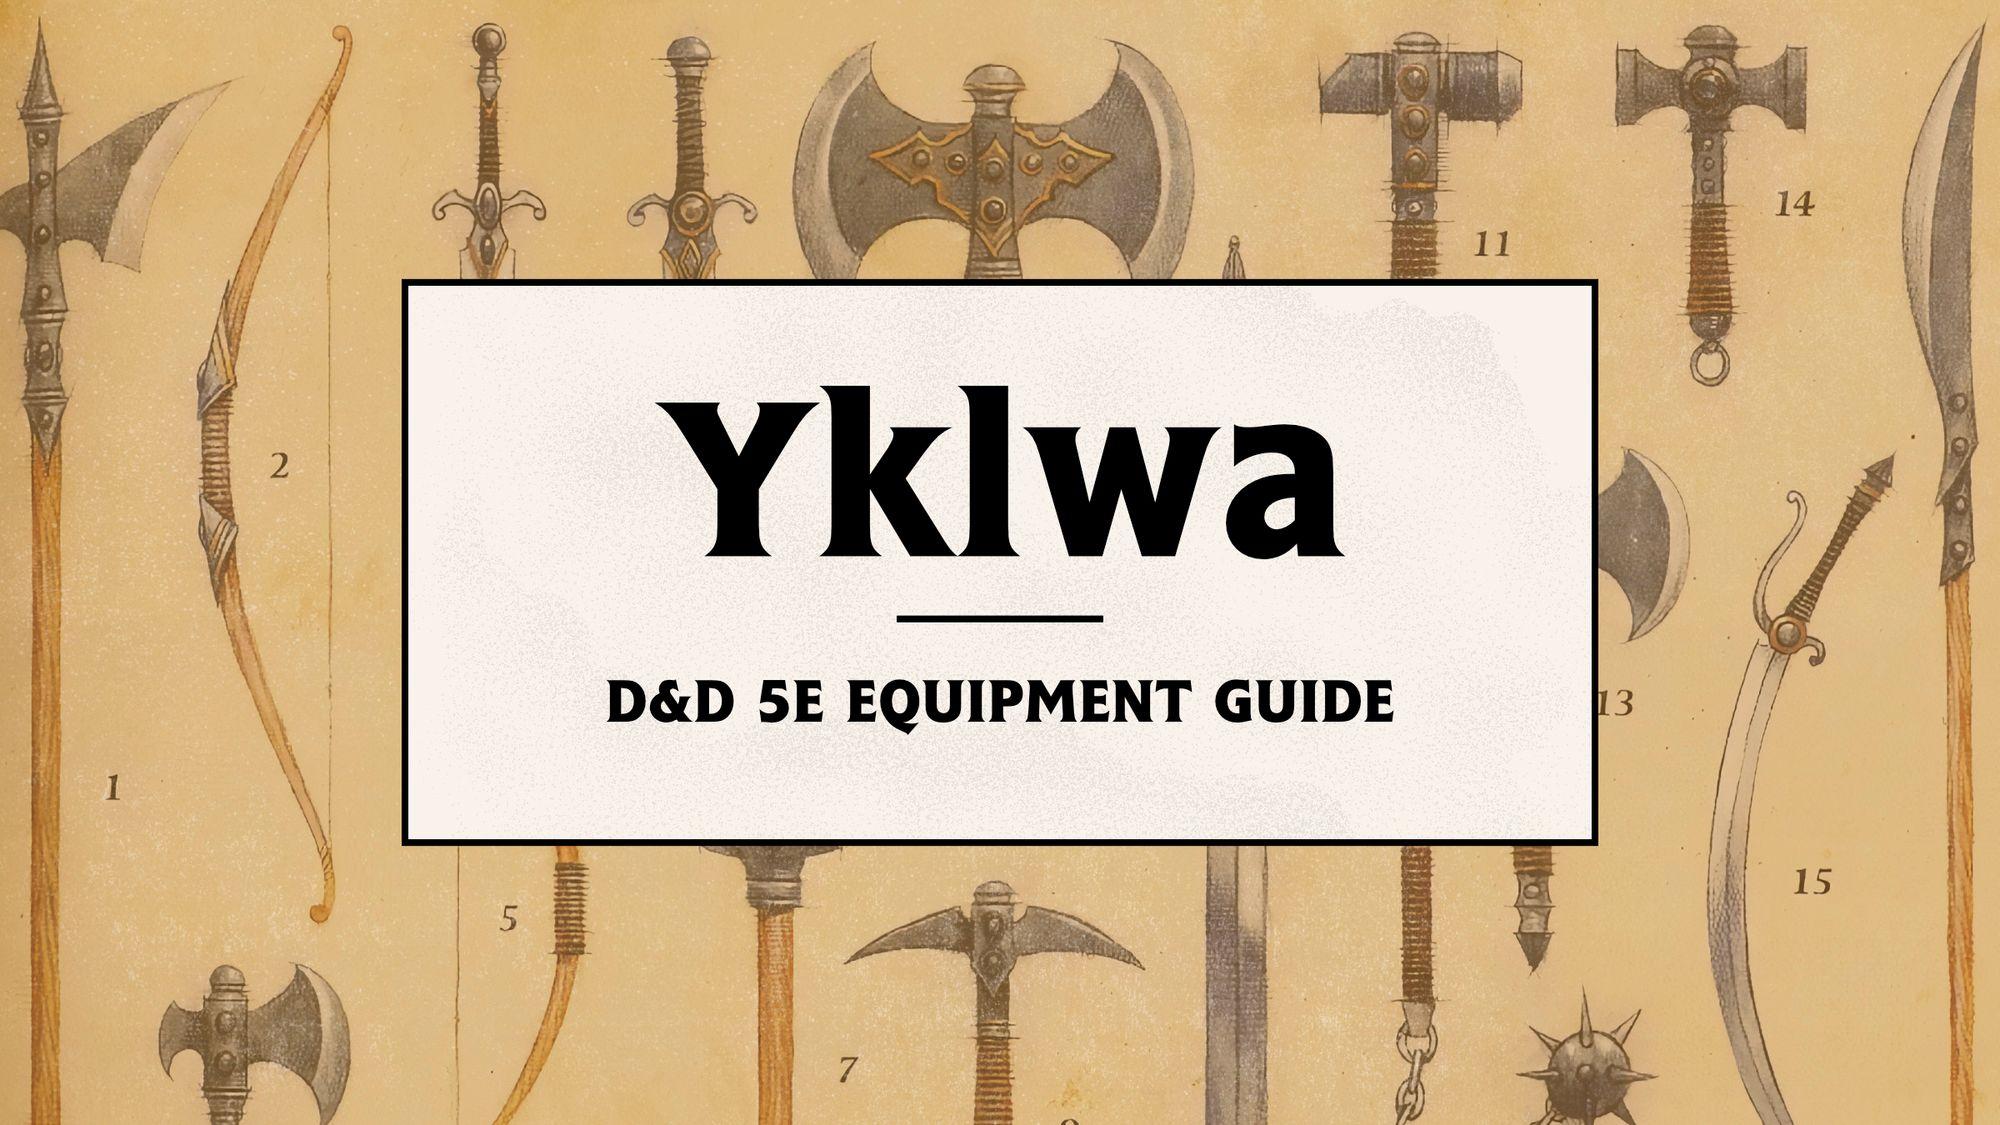 Image of basic weapons for D&D 5e featuring the Yklwa.